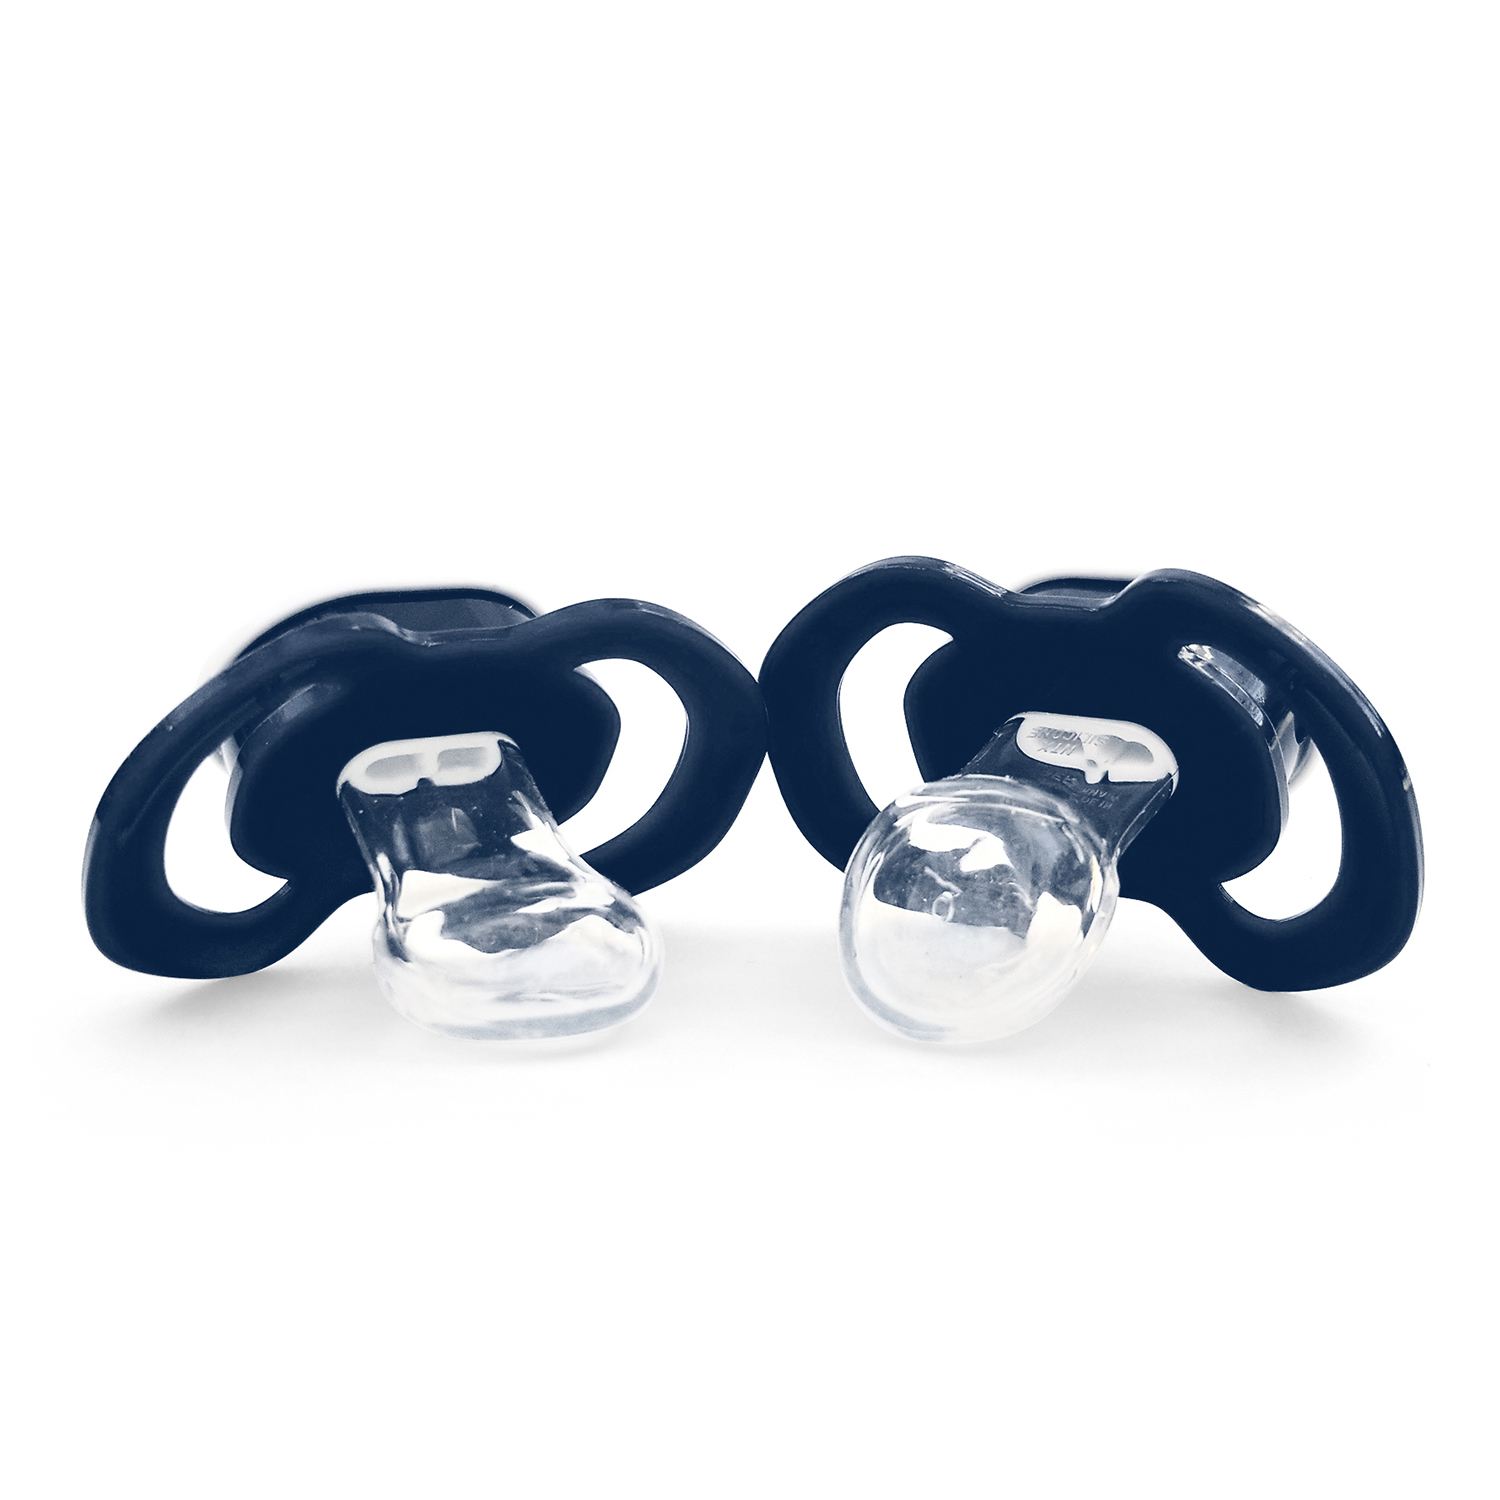 Gonzaga 2-Pack Pacifiers - image 4 of 5